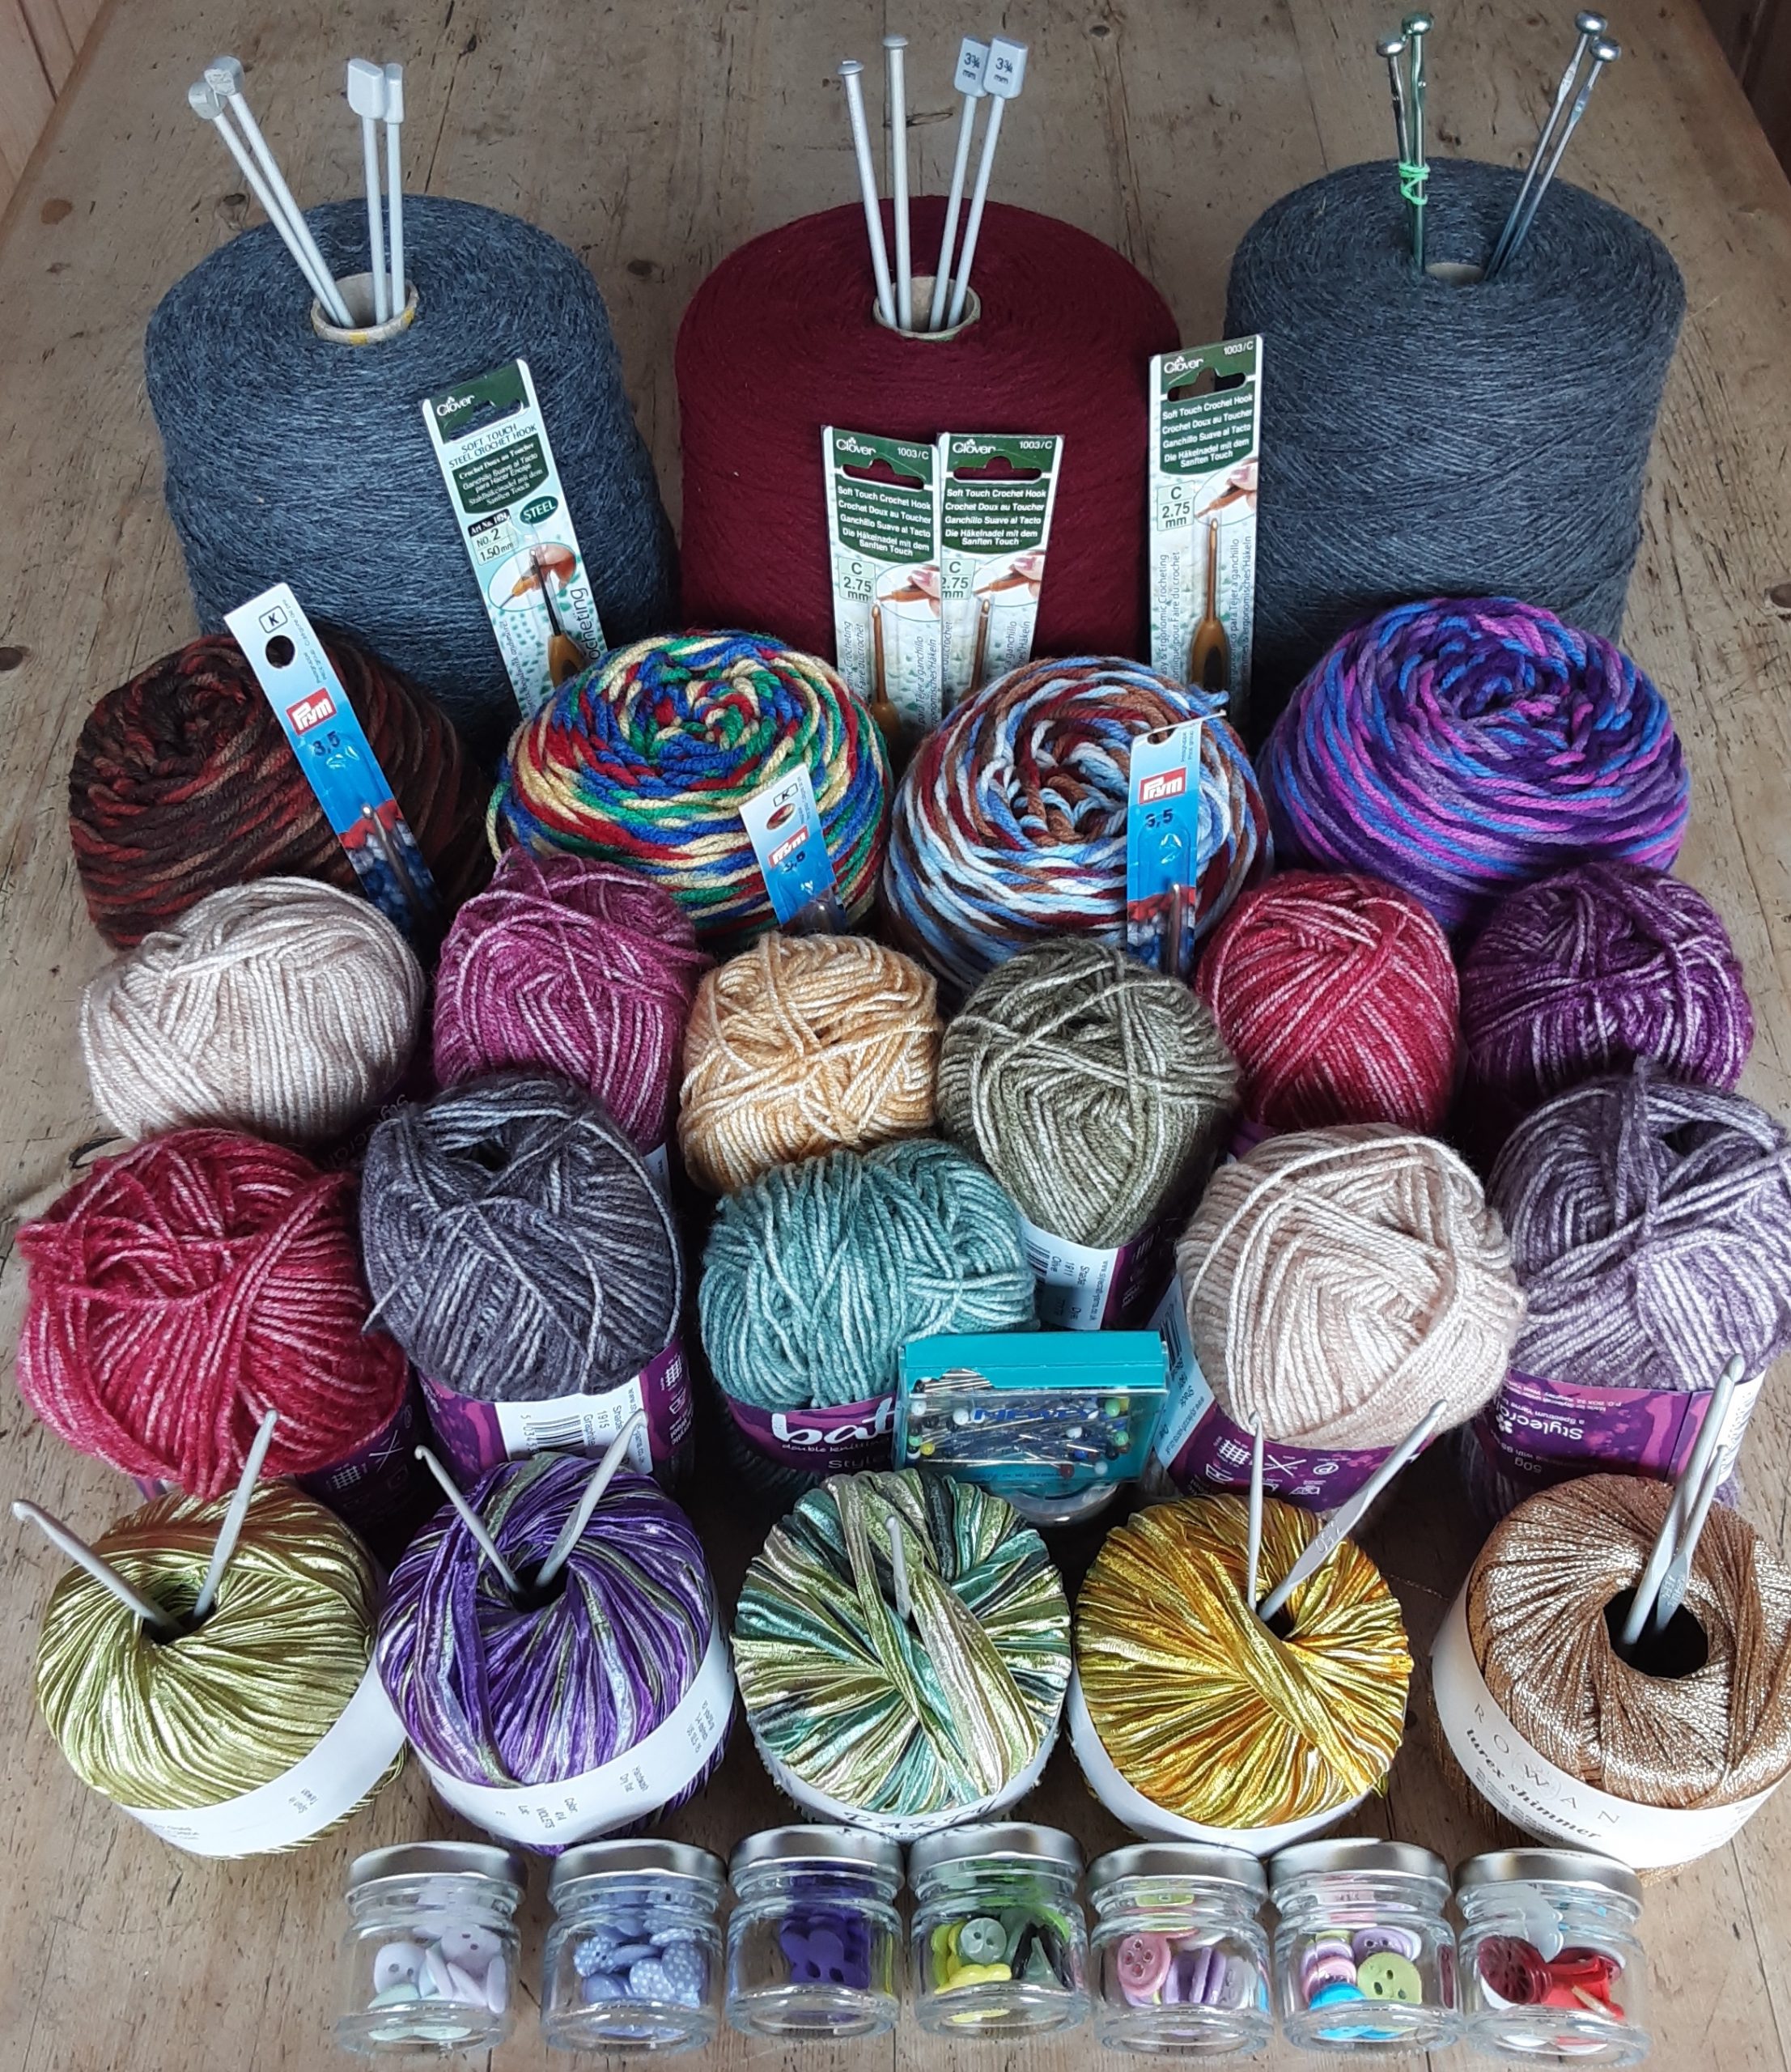 Knitting kits for refugees – Knit For Peace